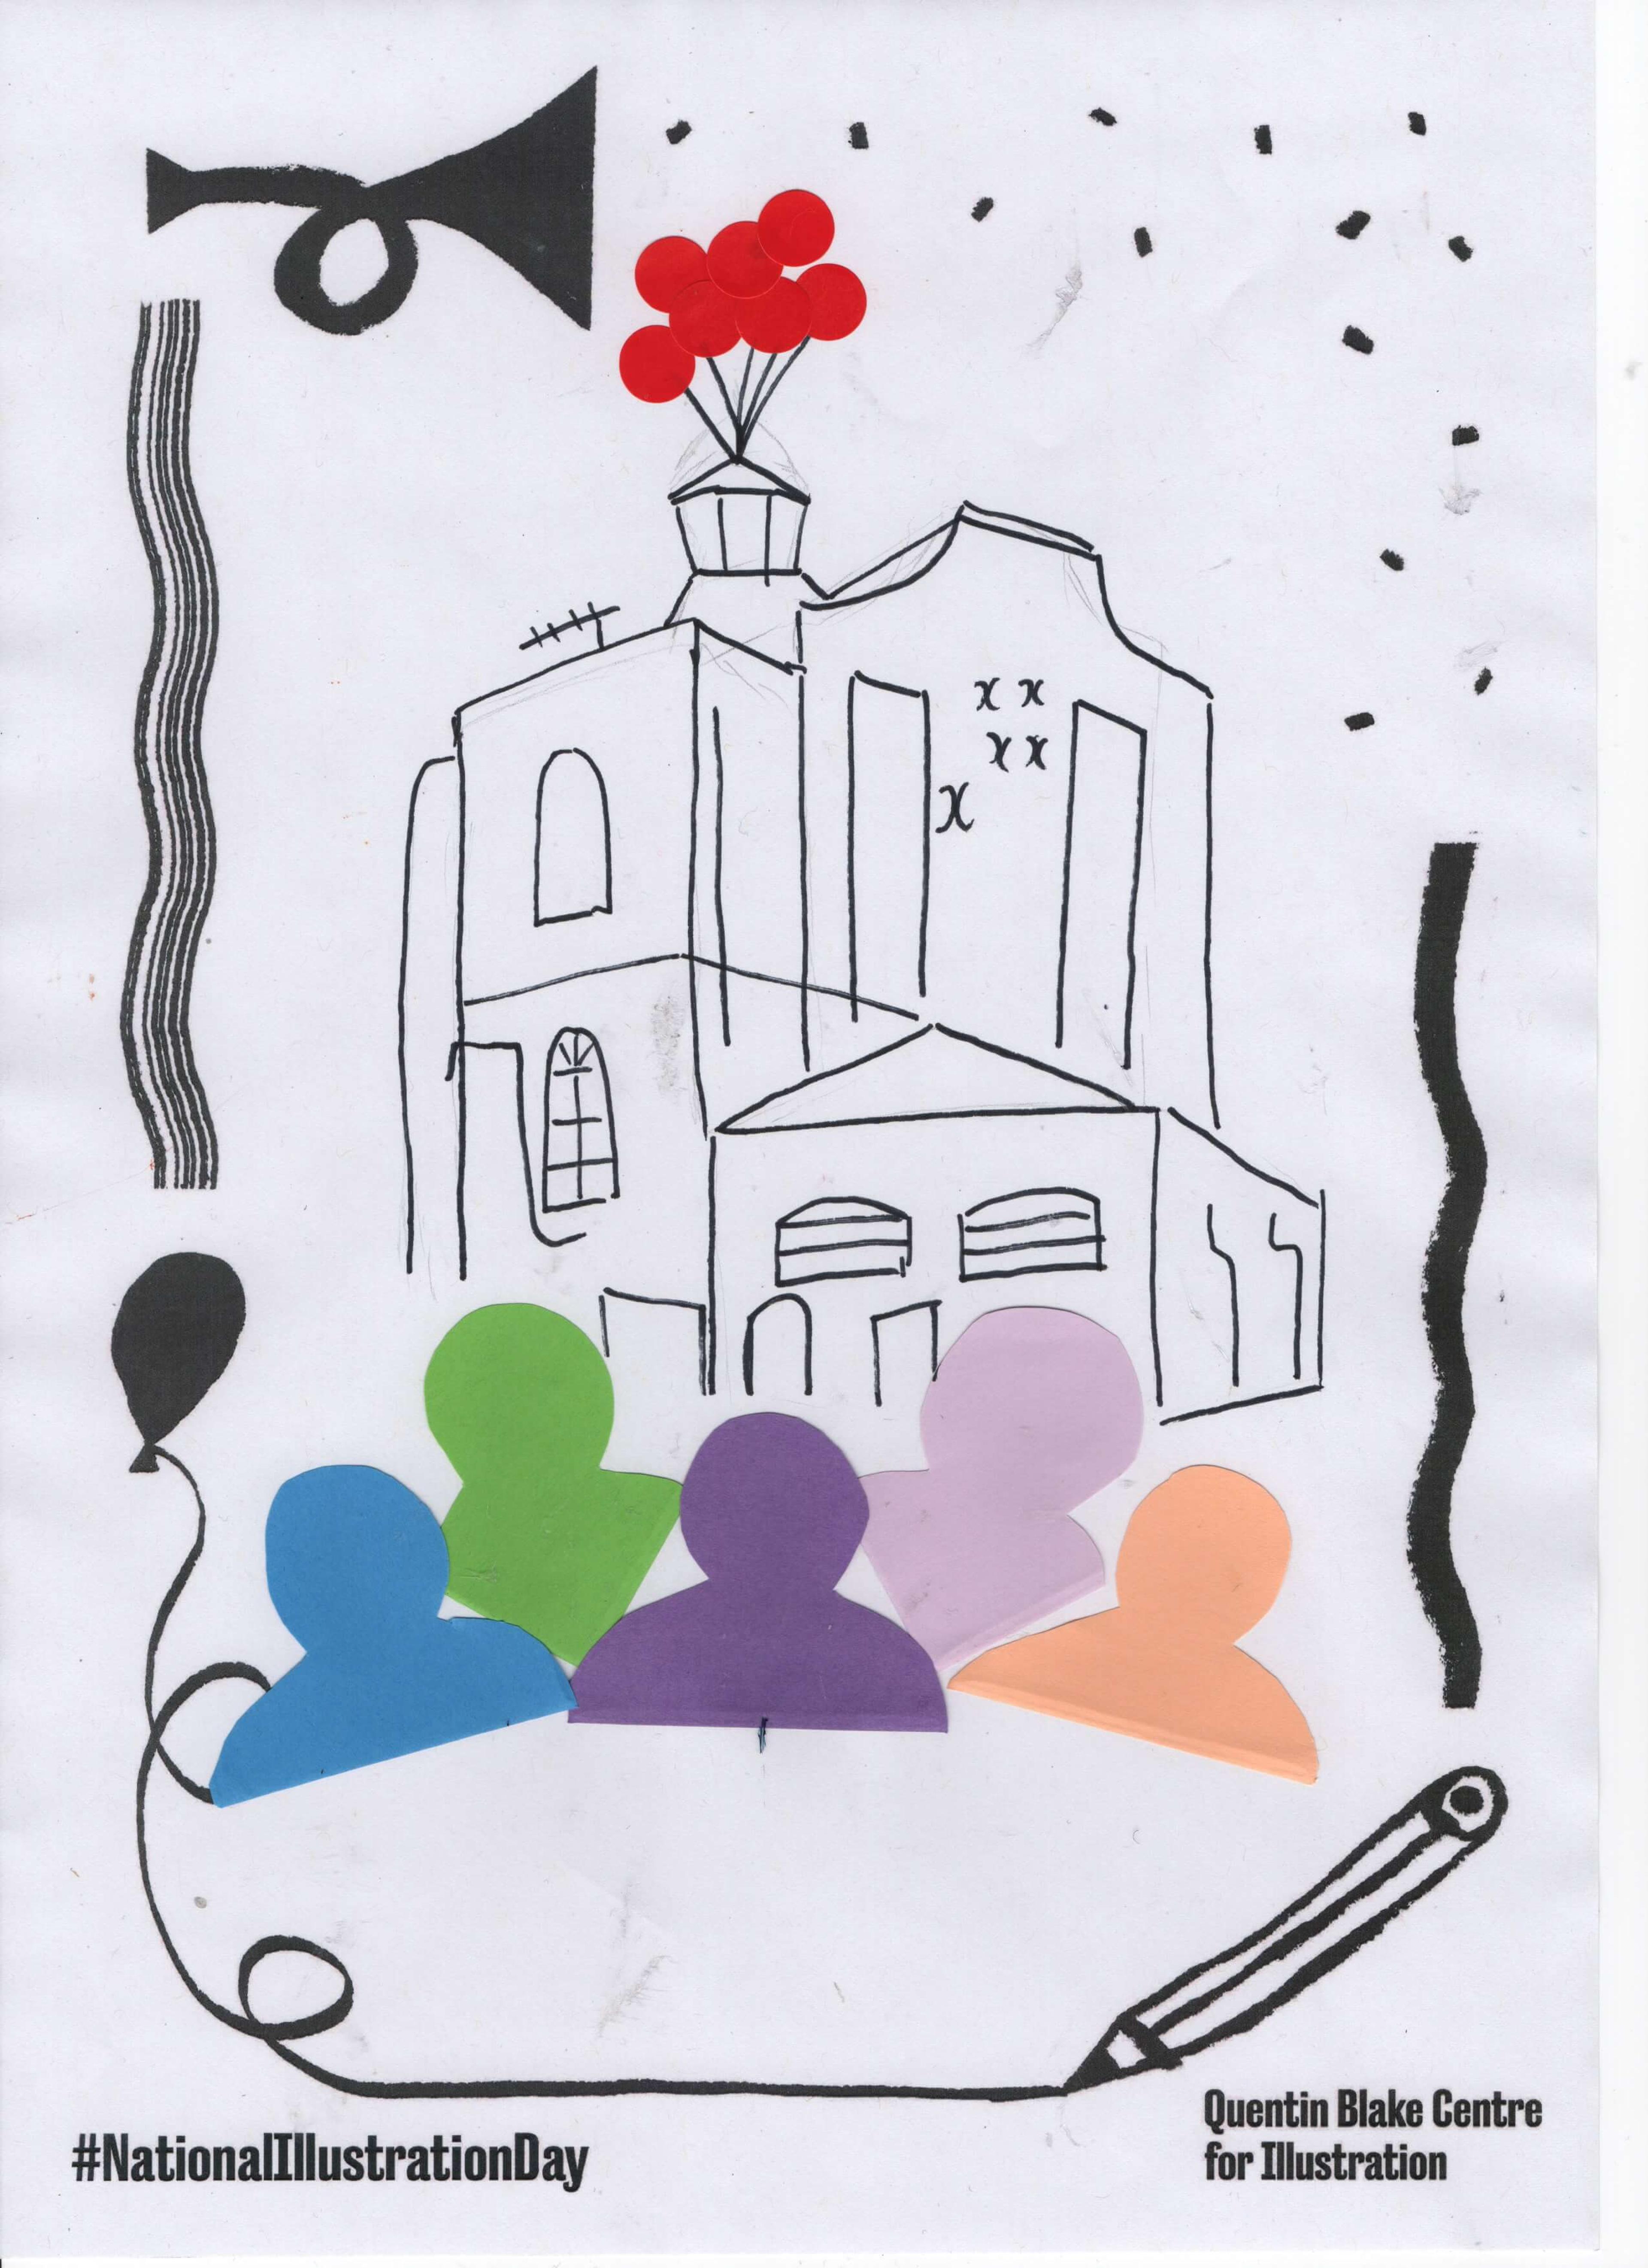 Colourful cut-out silhouettes of people looking at an line drawing of a building (our future site in New River Head), depicted with red balloons emerging from the chimney.